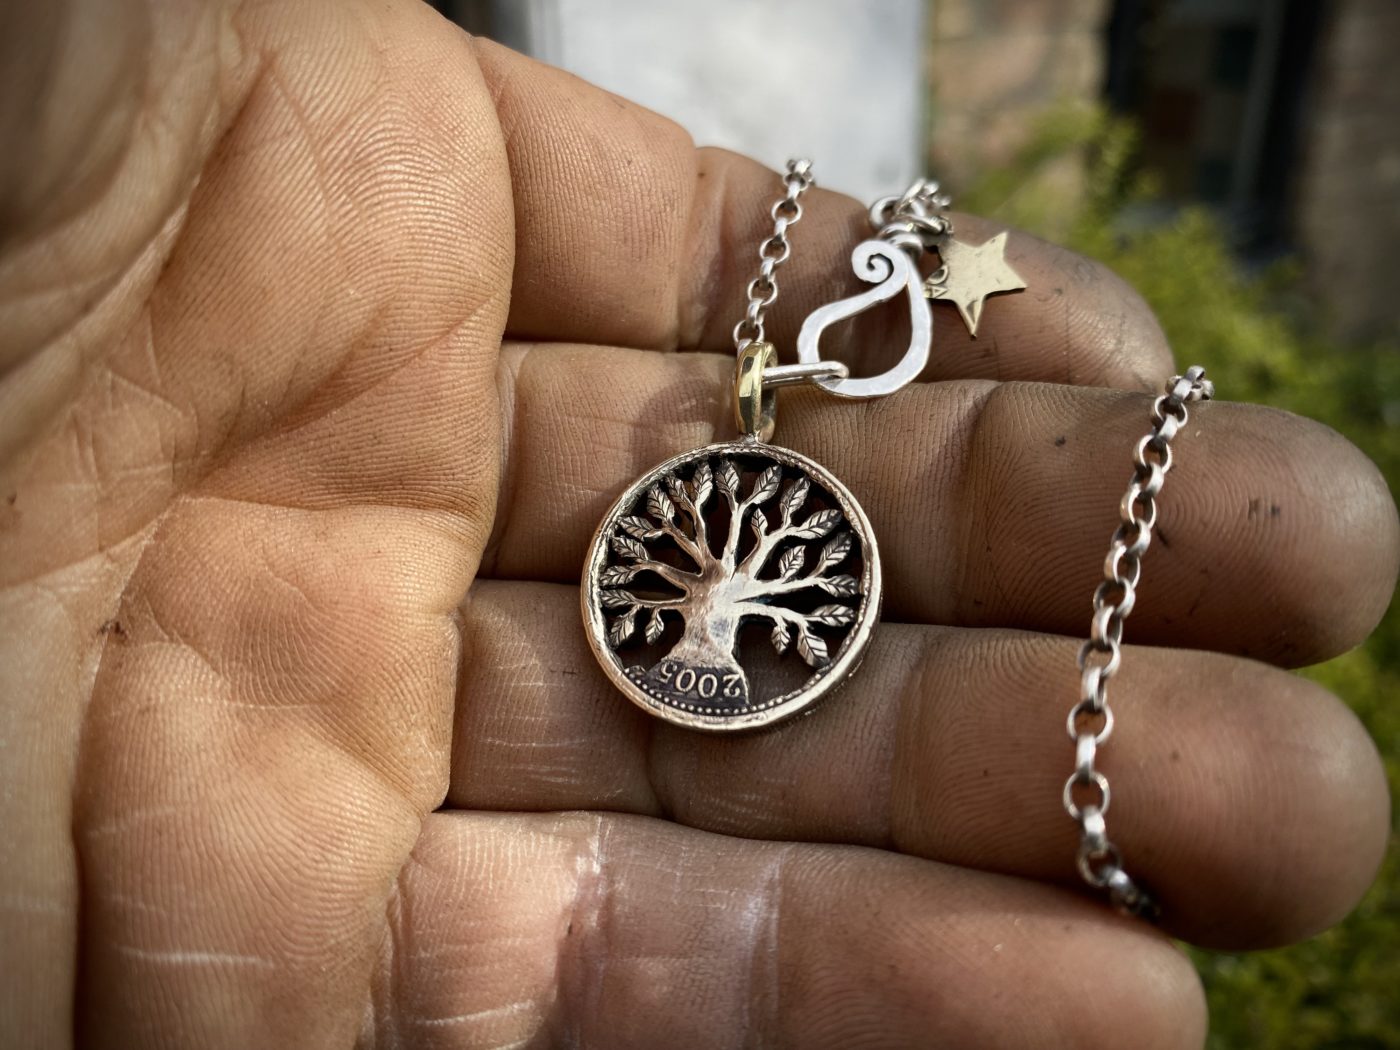 18th birthday gift idea handmade and ethically recycled tree of life necklace pendant made in England from a upcycled pound coin 2006